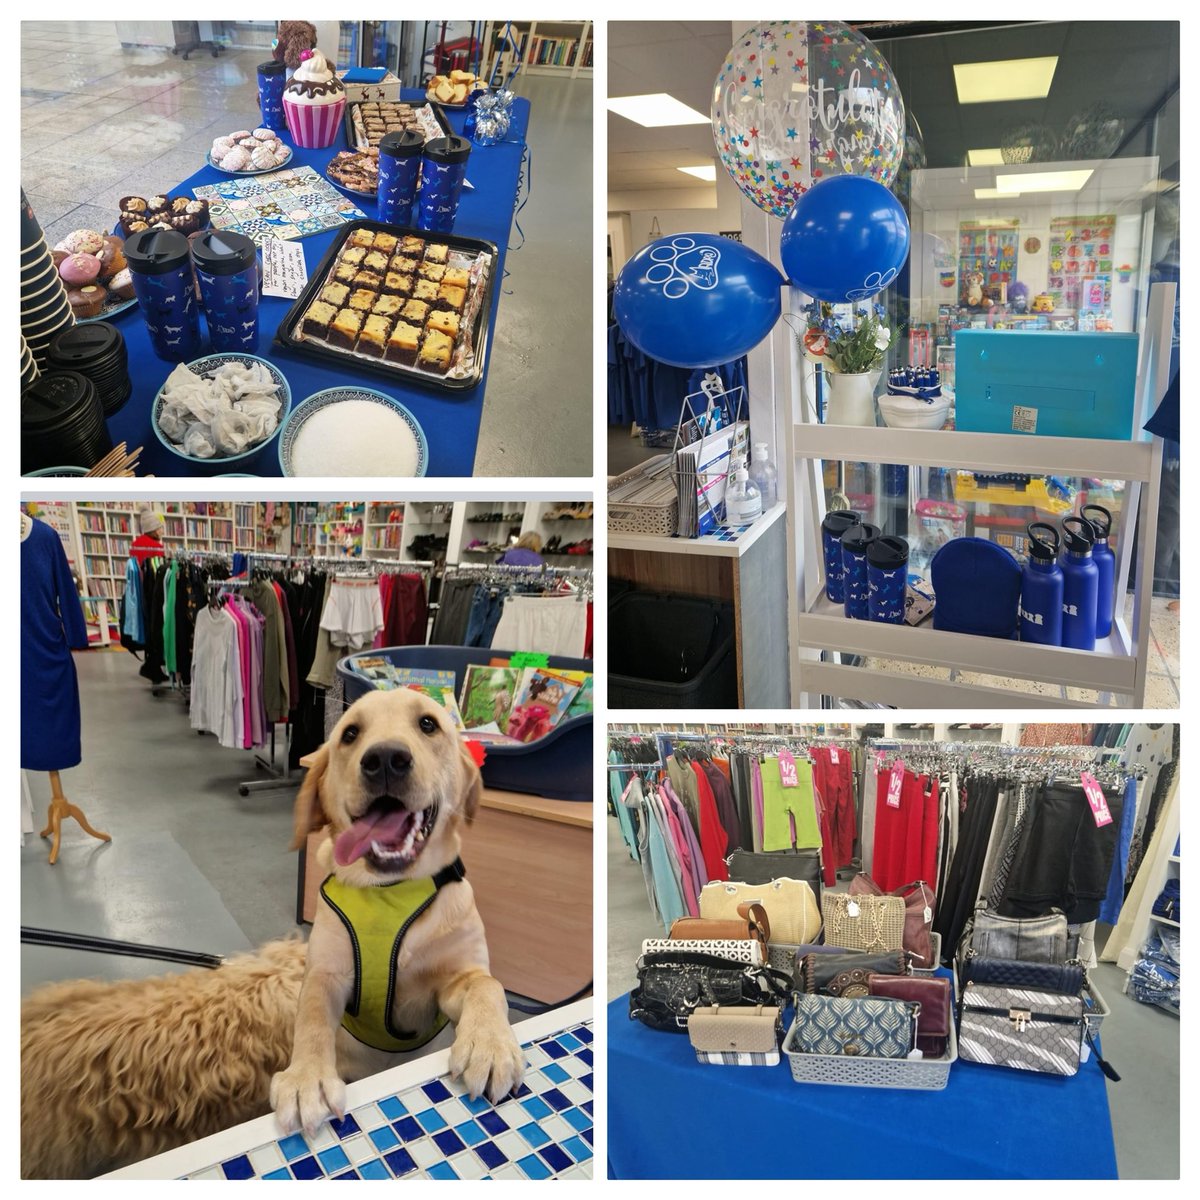 Join us today to celebrate our 1 yr anniversary in our fabulous revamped MADRA shop beside Supervalu in #Moycullen 🎉 We’ll have party vibes with coffee and cake, half-price & €1 sale A fun-filled kiddies corner, family and #dogfriendly Open 11am- 4pm 📚👠👗🛍️🐕